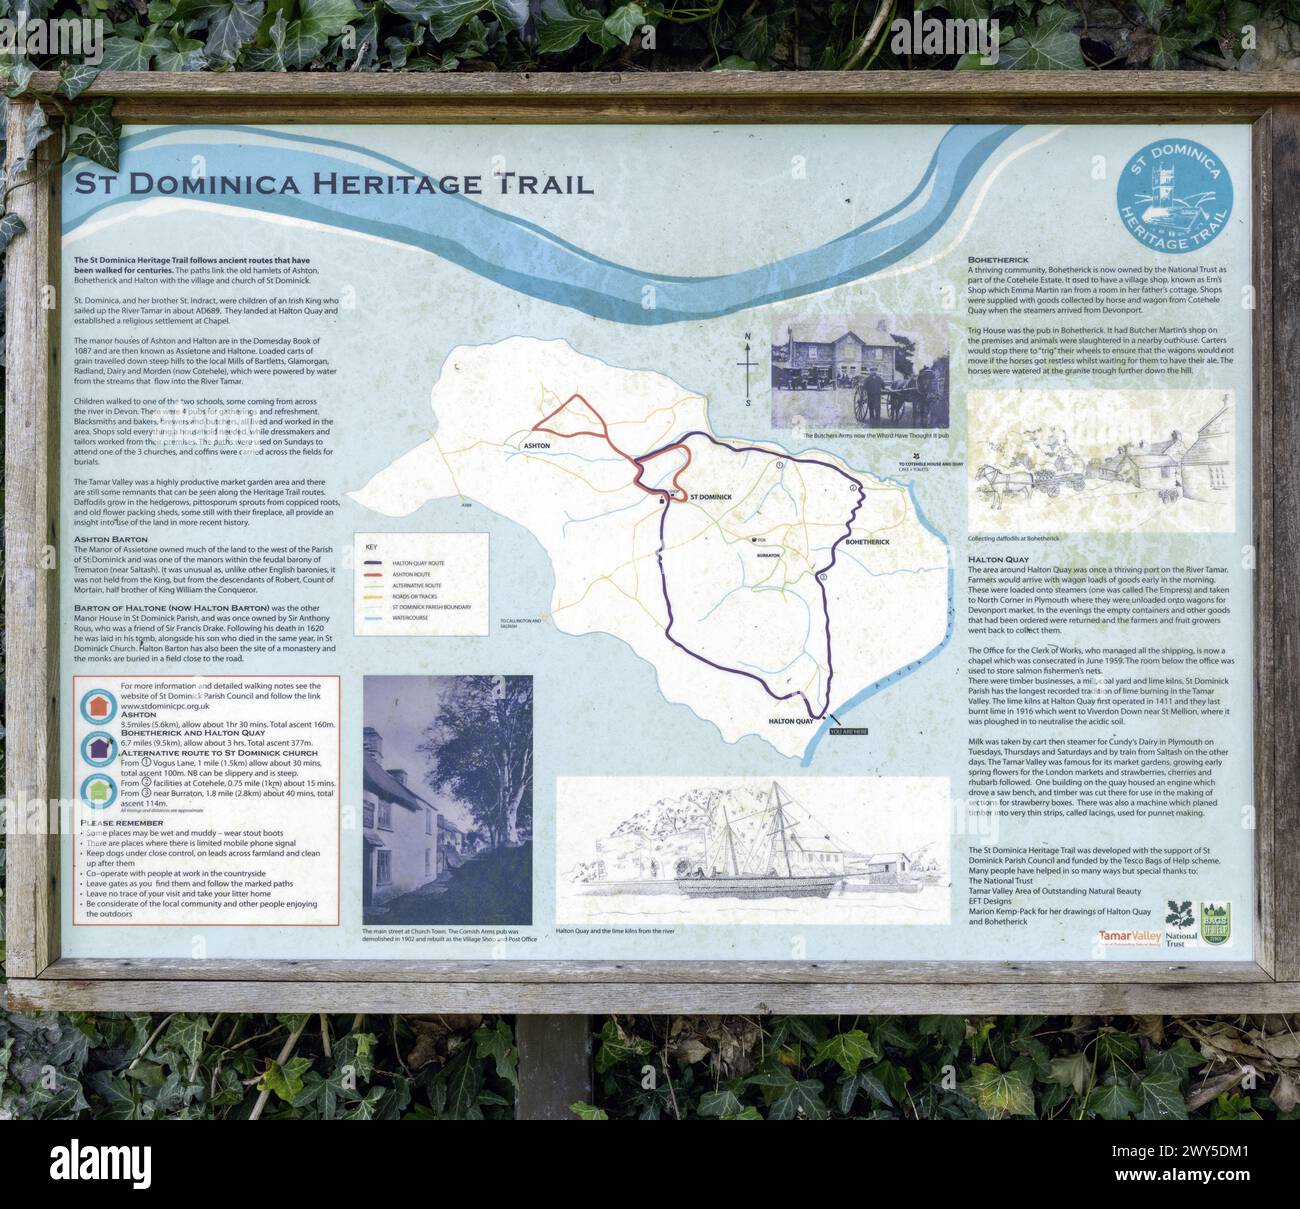 Tourist information board at Halton Quay on the banks of the River Tamar, Cornwall, England, UK, detailing St Dominica Heritage Trail Stock Photo